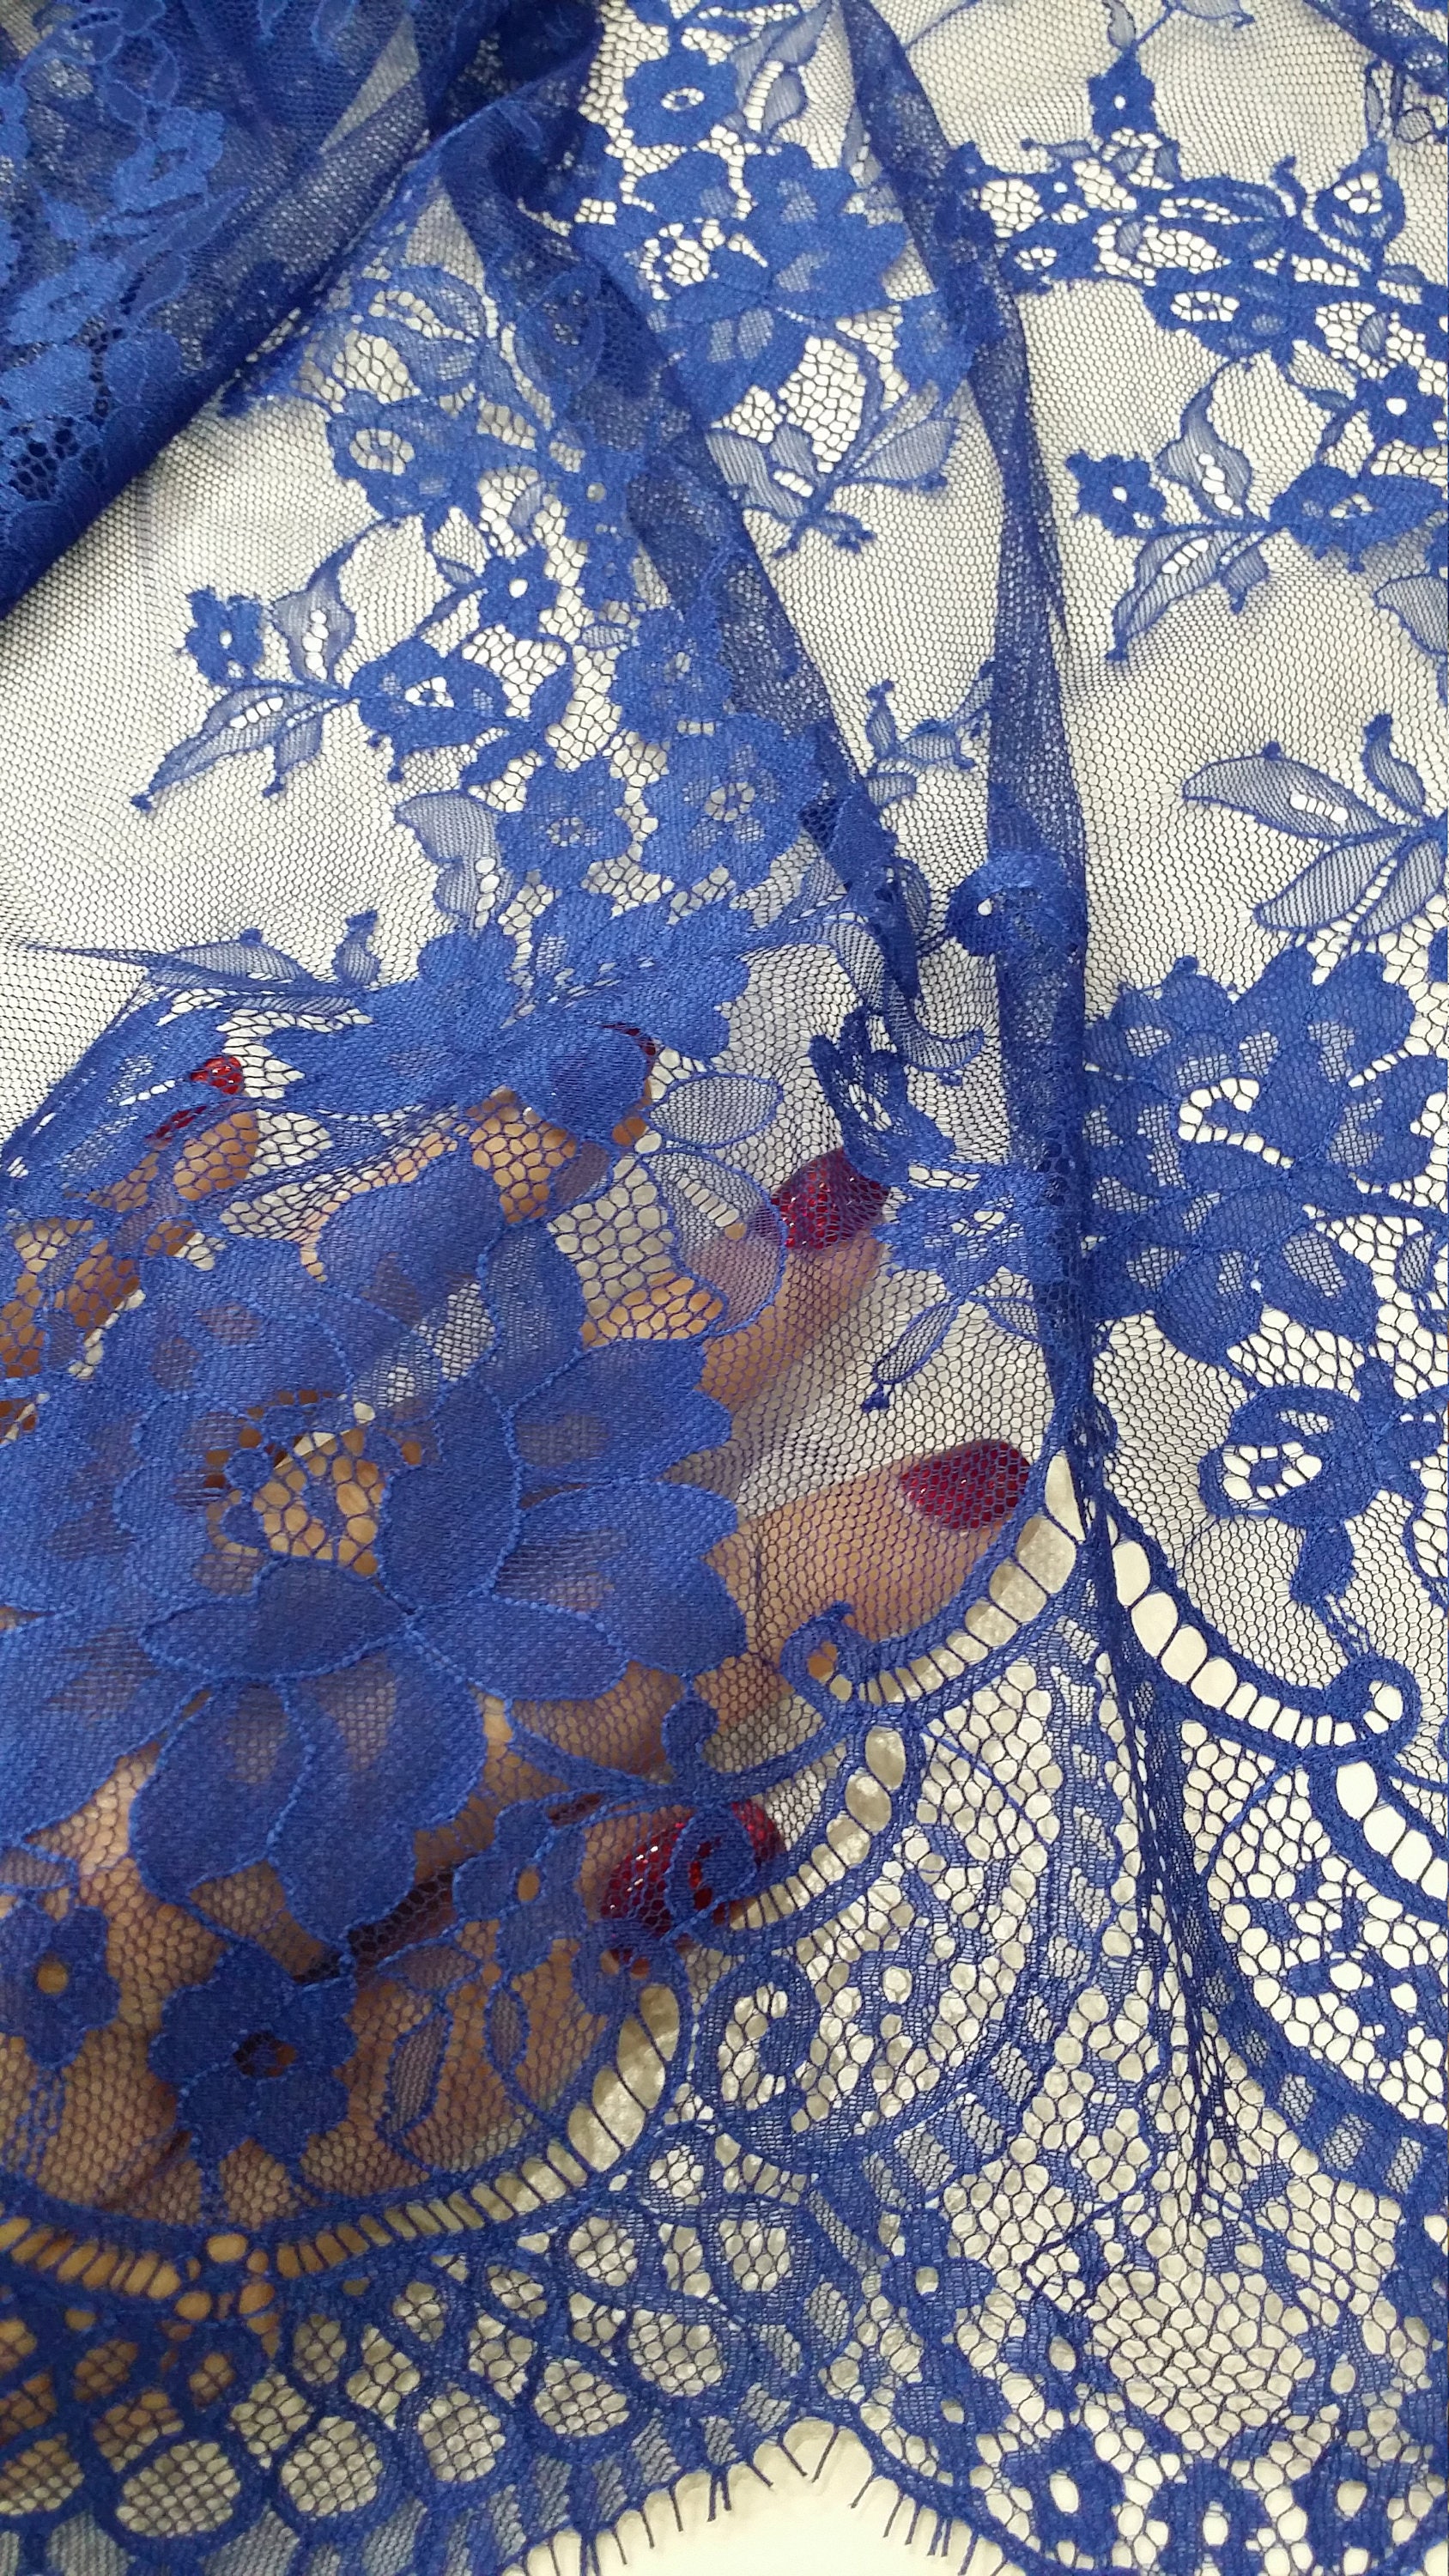 Blue lace fabric Chantilly Lace French Lace Bridal lace | Etsy